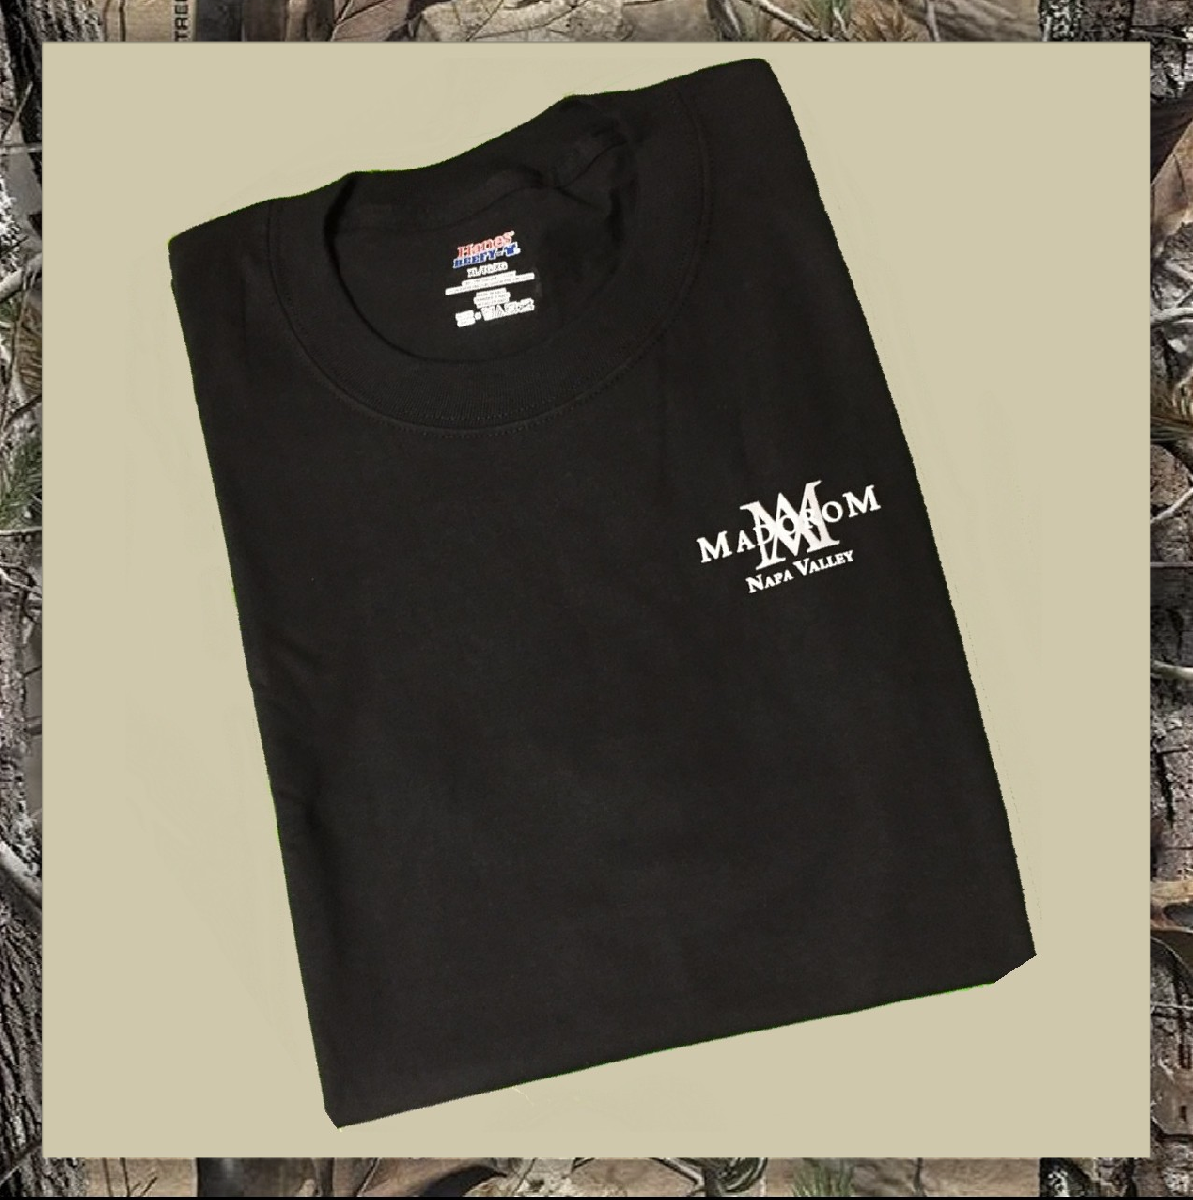 Product Image for MadoroM Black T-Shirt